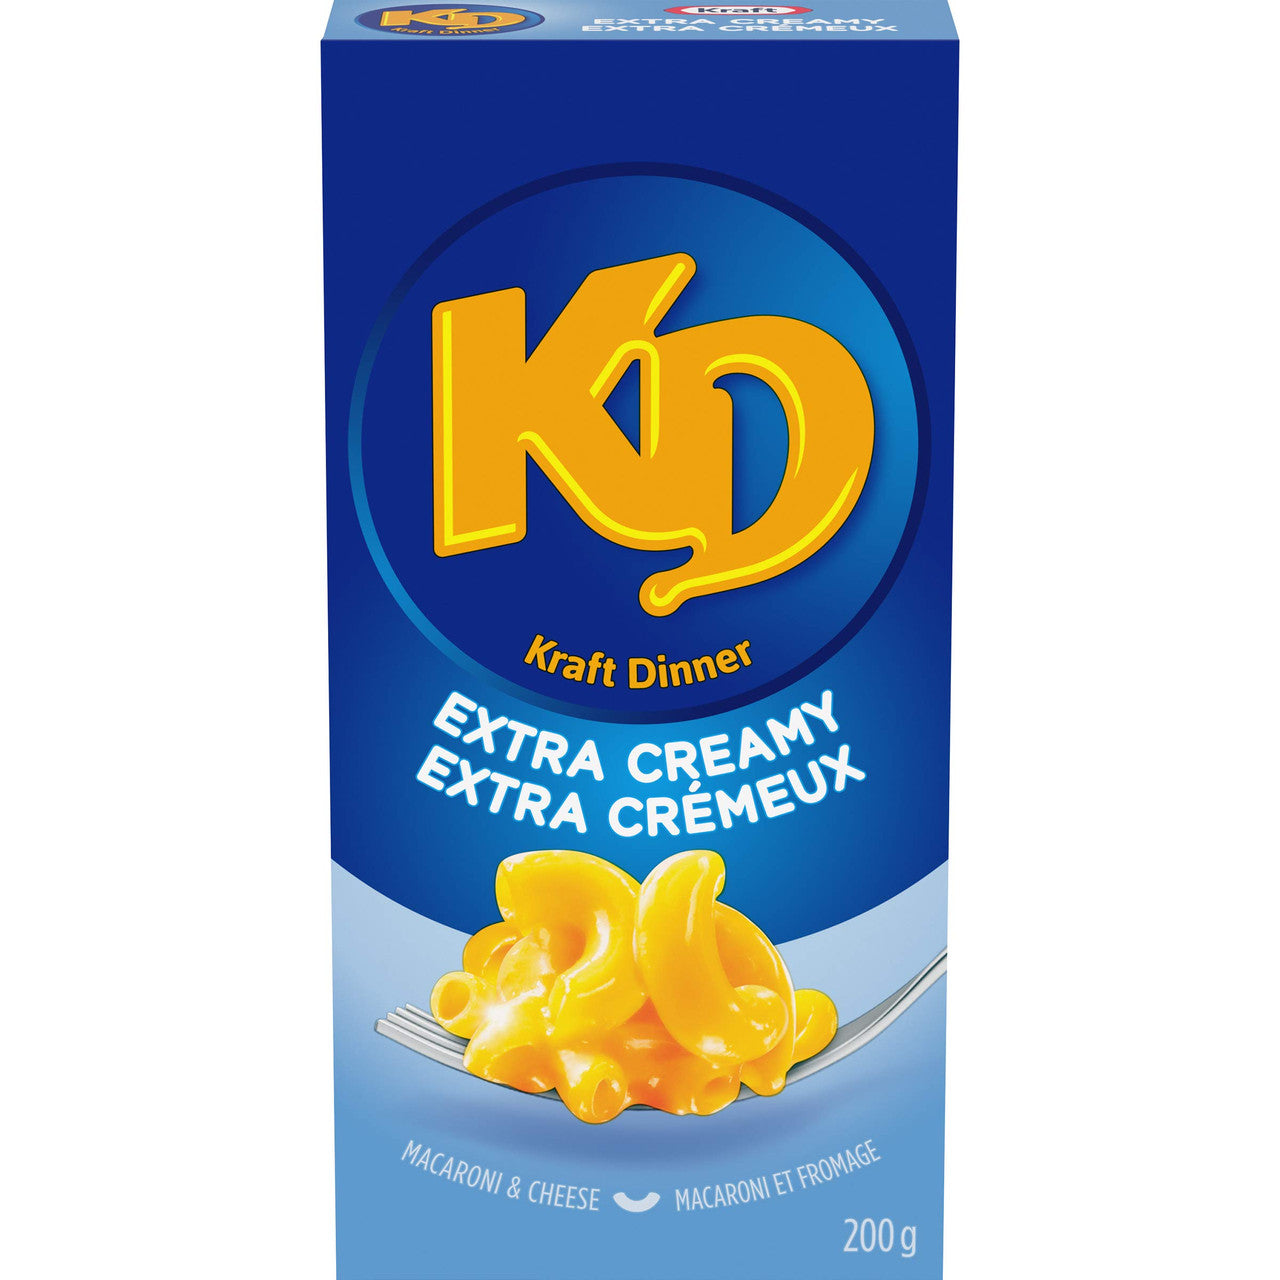 Kraft Dinner Extra Creamy Macaroni & Cheese, 200g/7.1 oz., (24pk) {Imported from Canada}